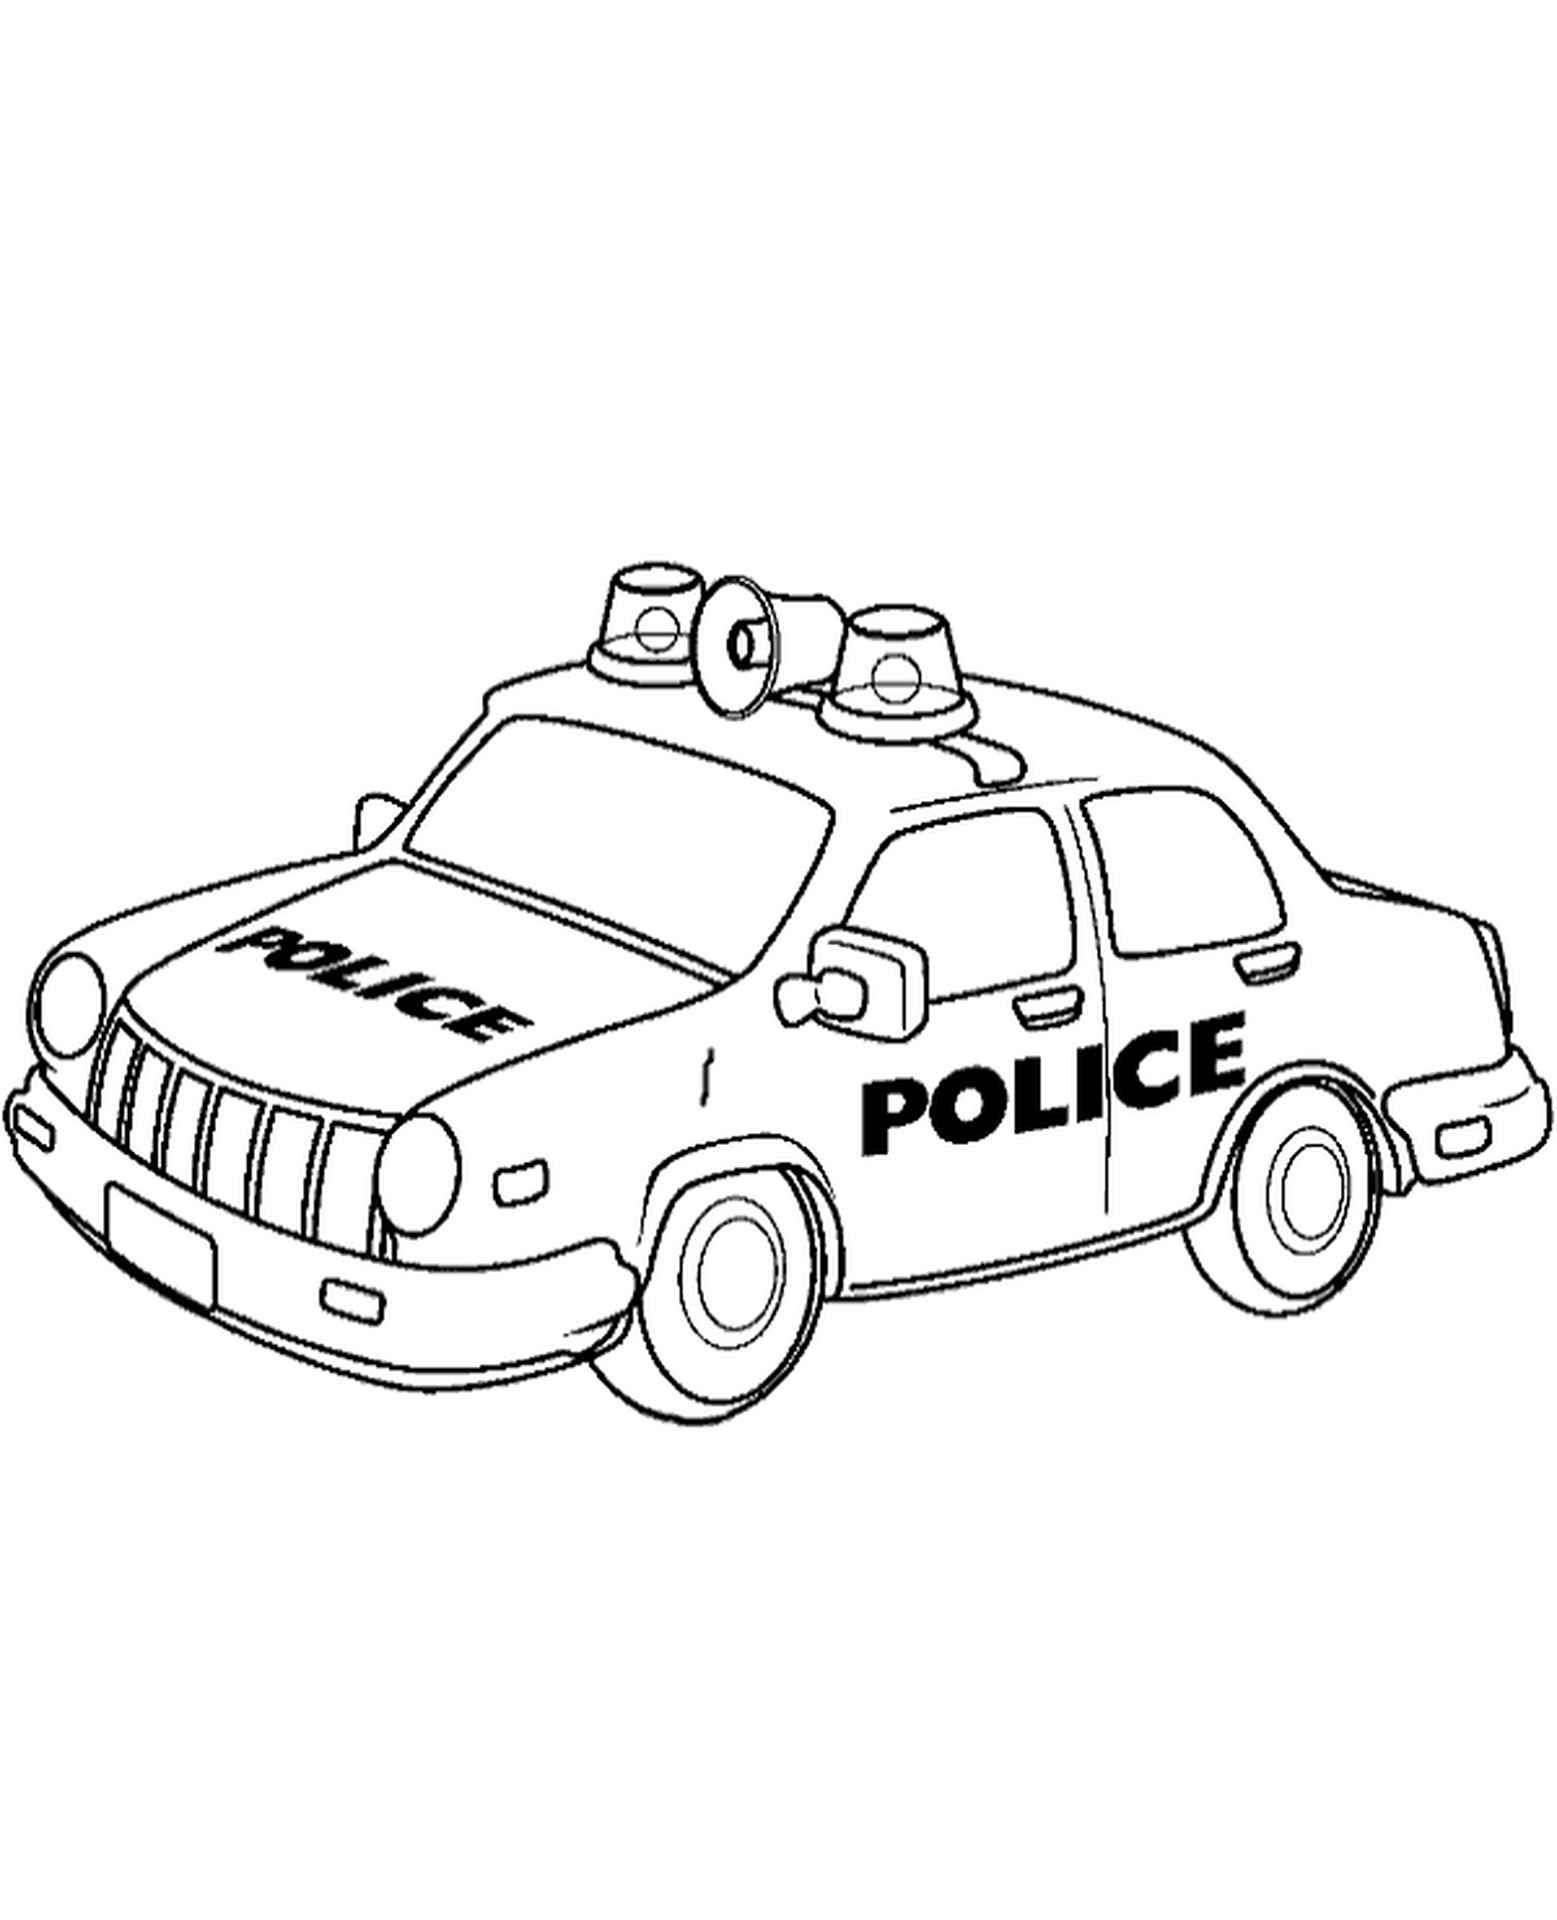 Best police coloring pages pdf